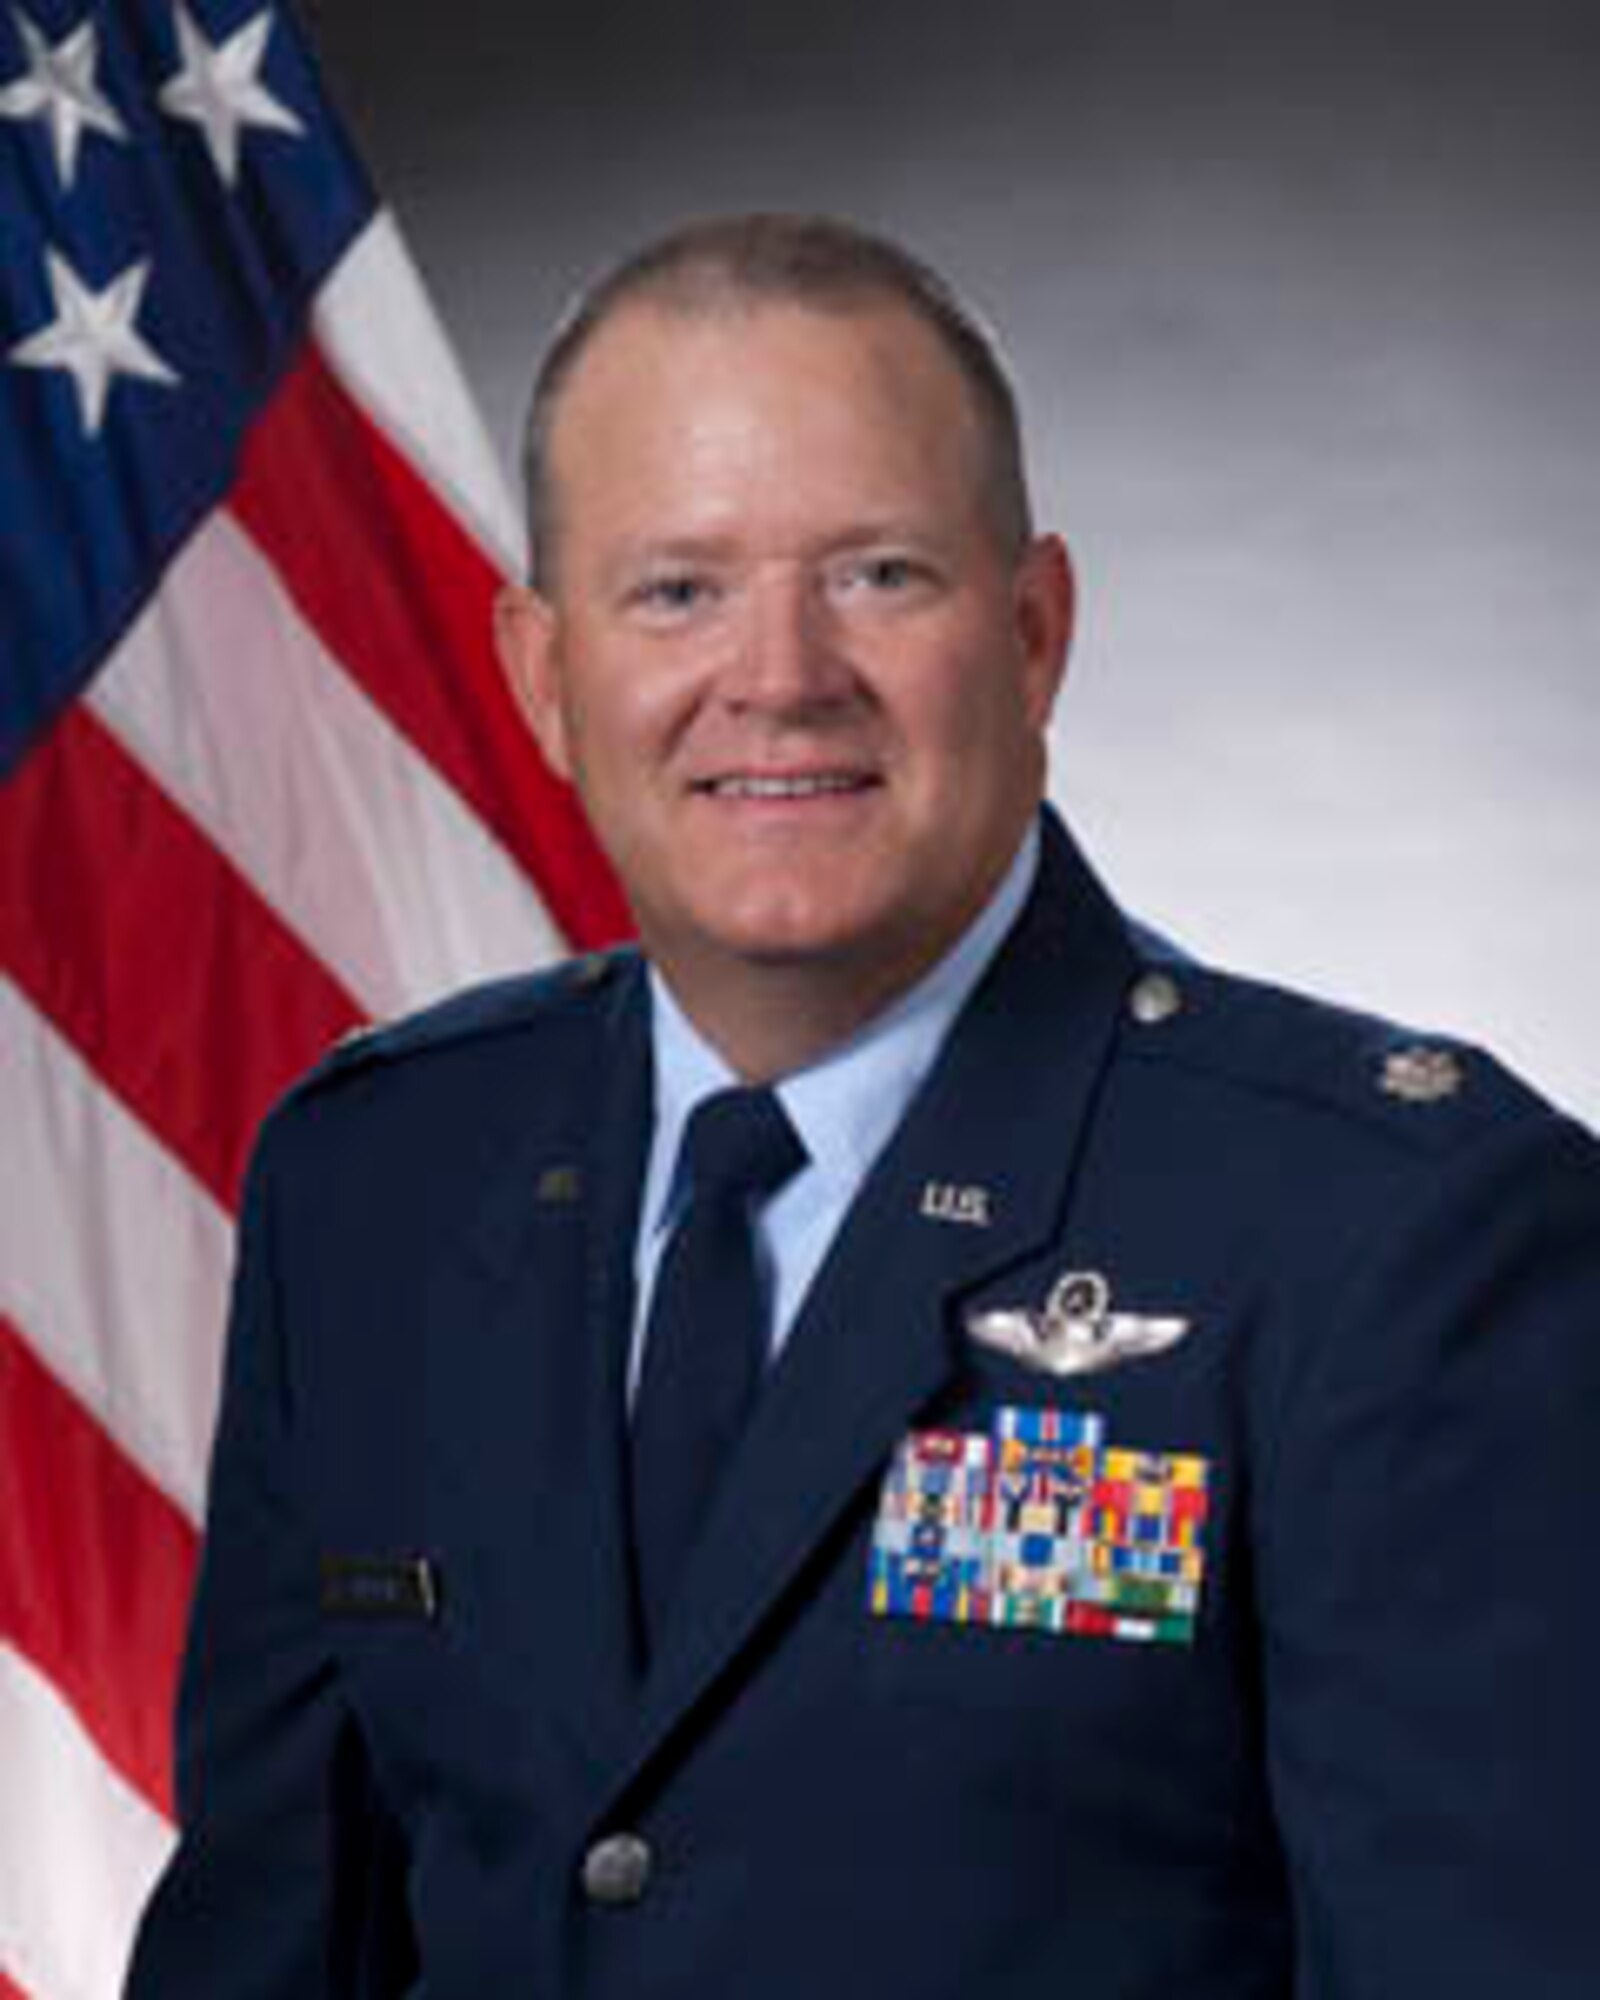 Lt. Col. Kenneth R. Rosson. Arriving at Tucson International Airport in 2000 and first serving in scheduling operations for the 152nd Fighter Squadron here, Rosson said he looks “forward to continue building upon the already solid foundation at the wing.” 